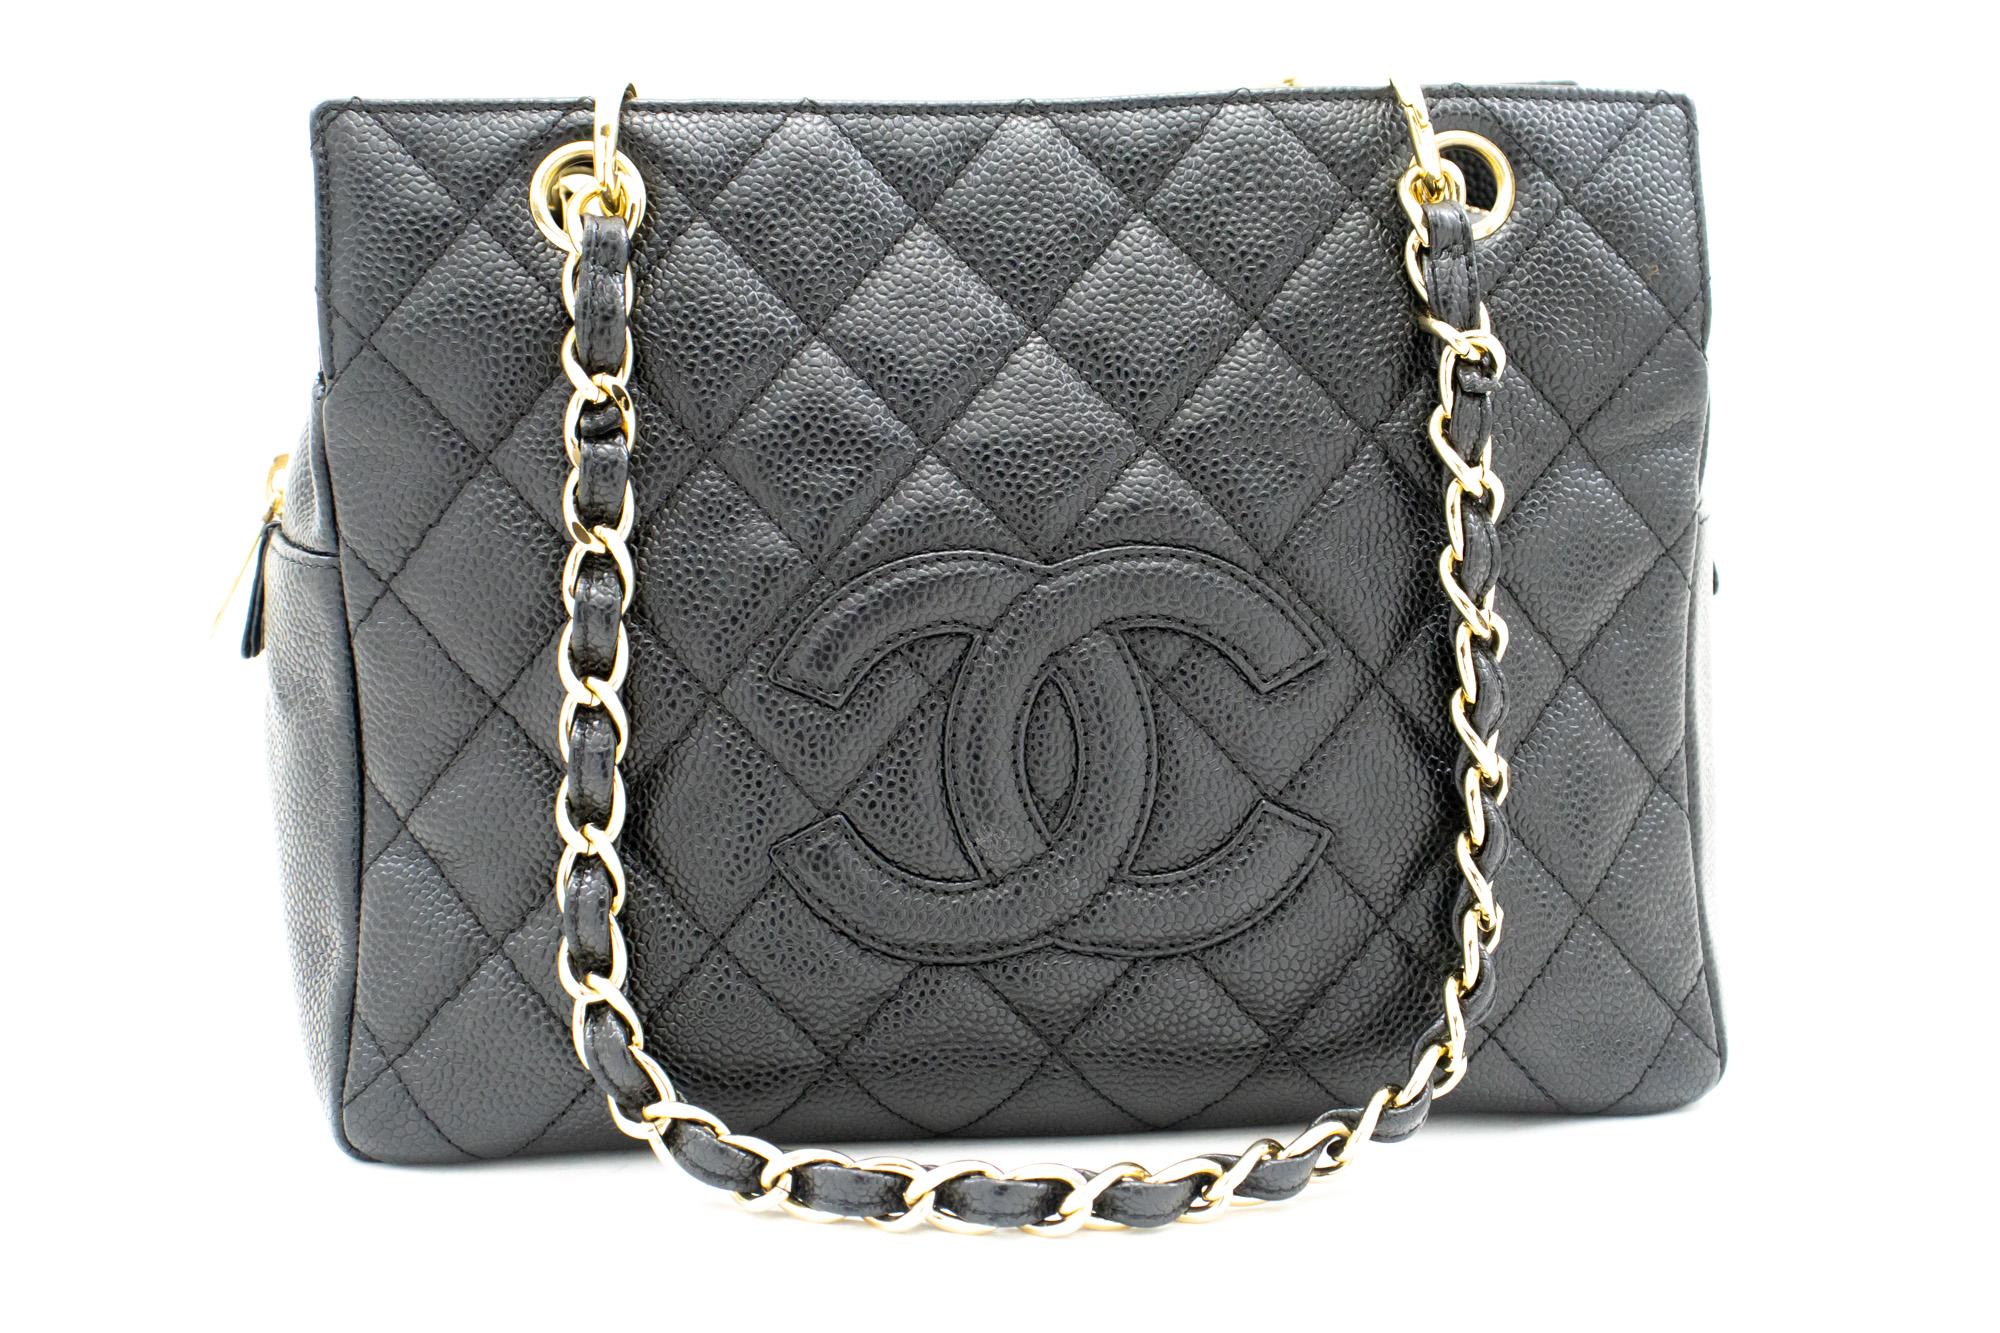 An authentic CHANEL Caviar Chain Shoulder Bag Shopping Tote Black Quilted Purse. The color is Black. The outside material is Leather. The pattern is Solid. This item is Vintage / Classic. The year of manufacture would be 2 0 0 2 .
Conditions &